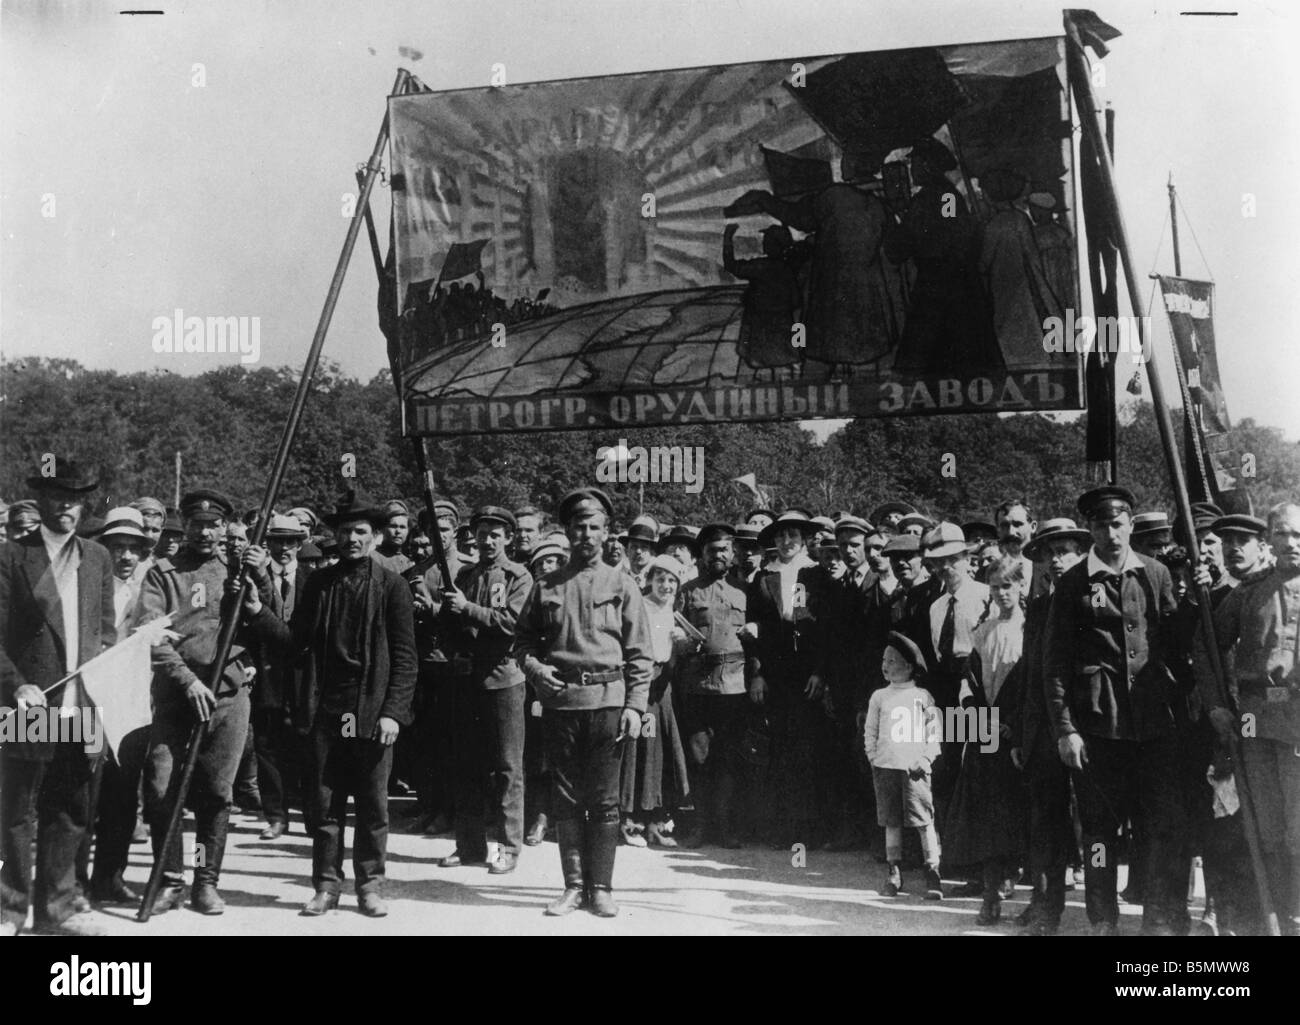 9RD 1917 7 16 A1 Russia July Coup 1917 Russian Revolution July Coup 1917 16 July 3 O S 1917 Workers and Peasants demanding Power Stock Photo